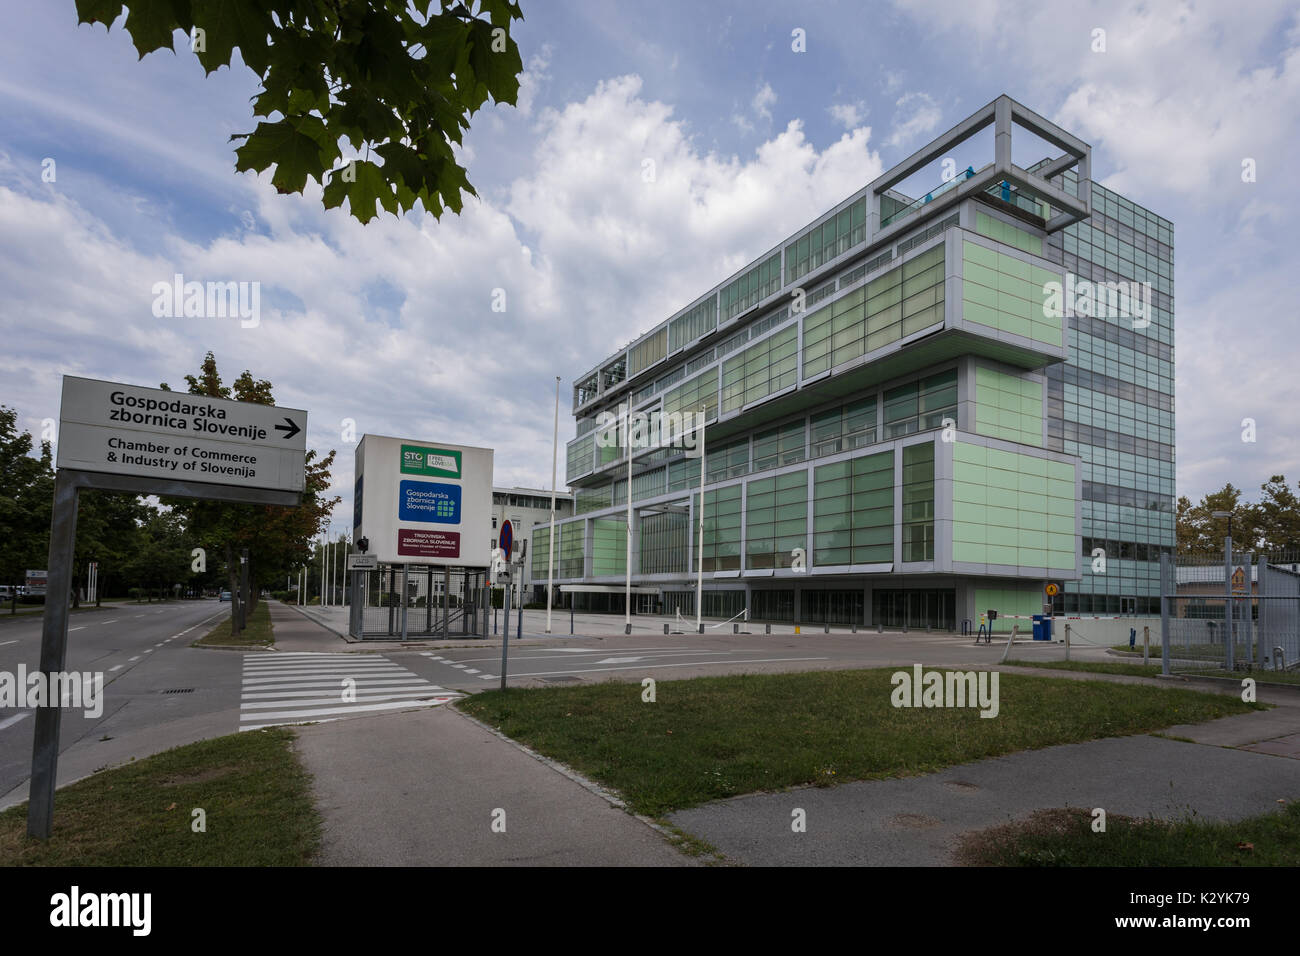 Chamber of Commerce and Industry of Slovenia building in Ljubljana, Slovenia Stock Photo